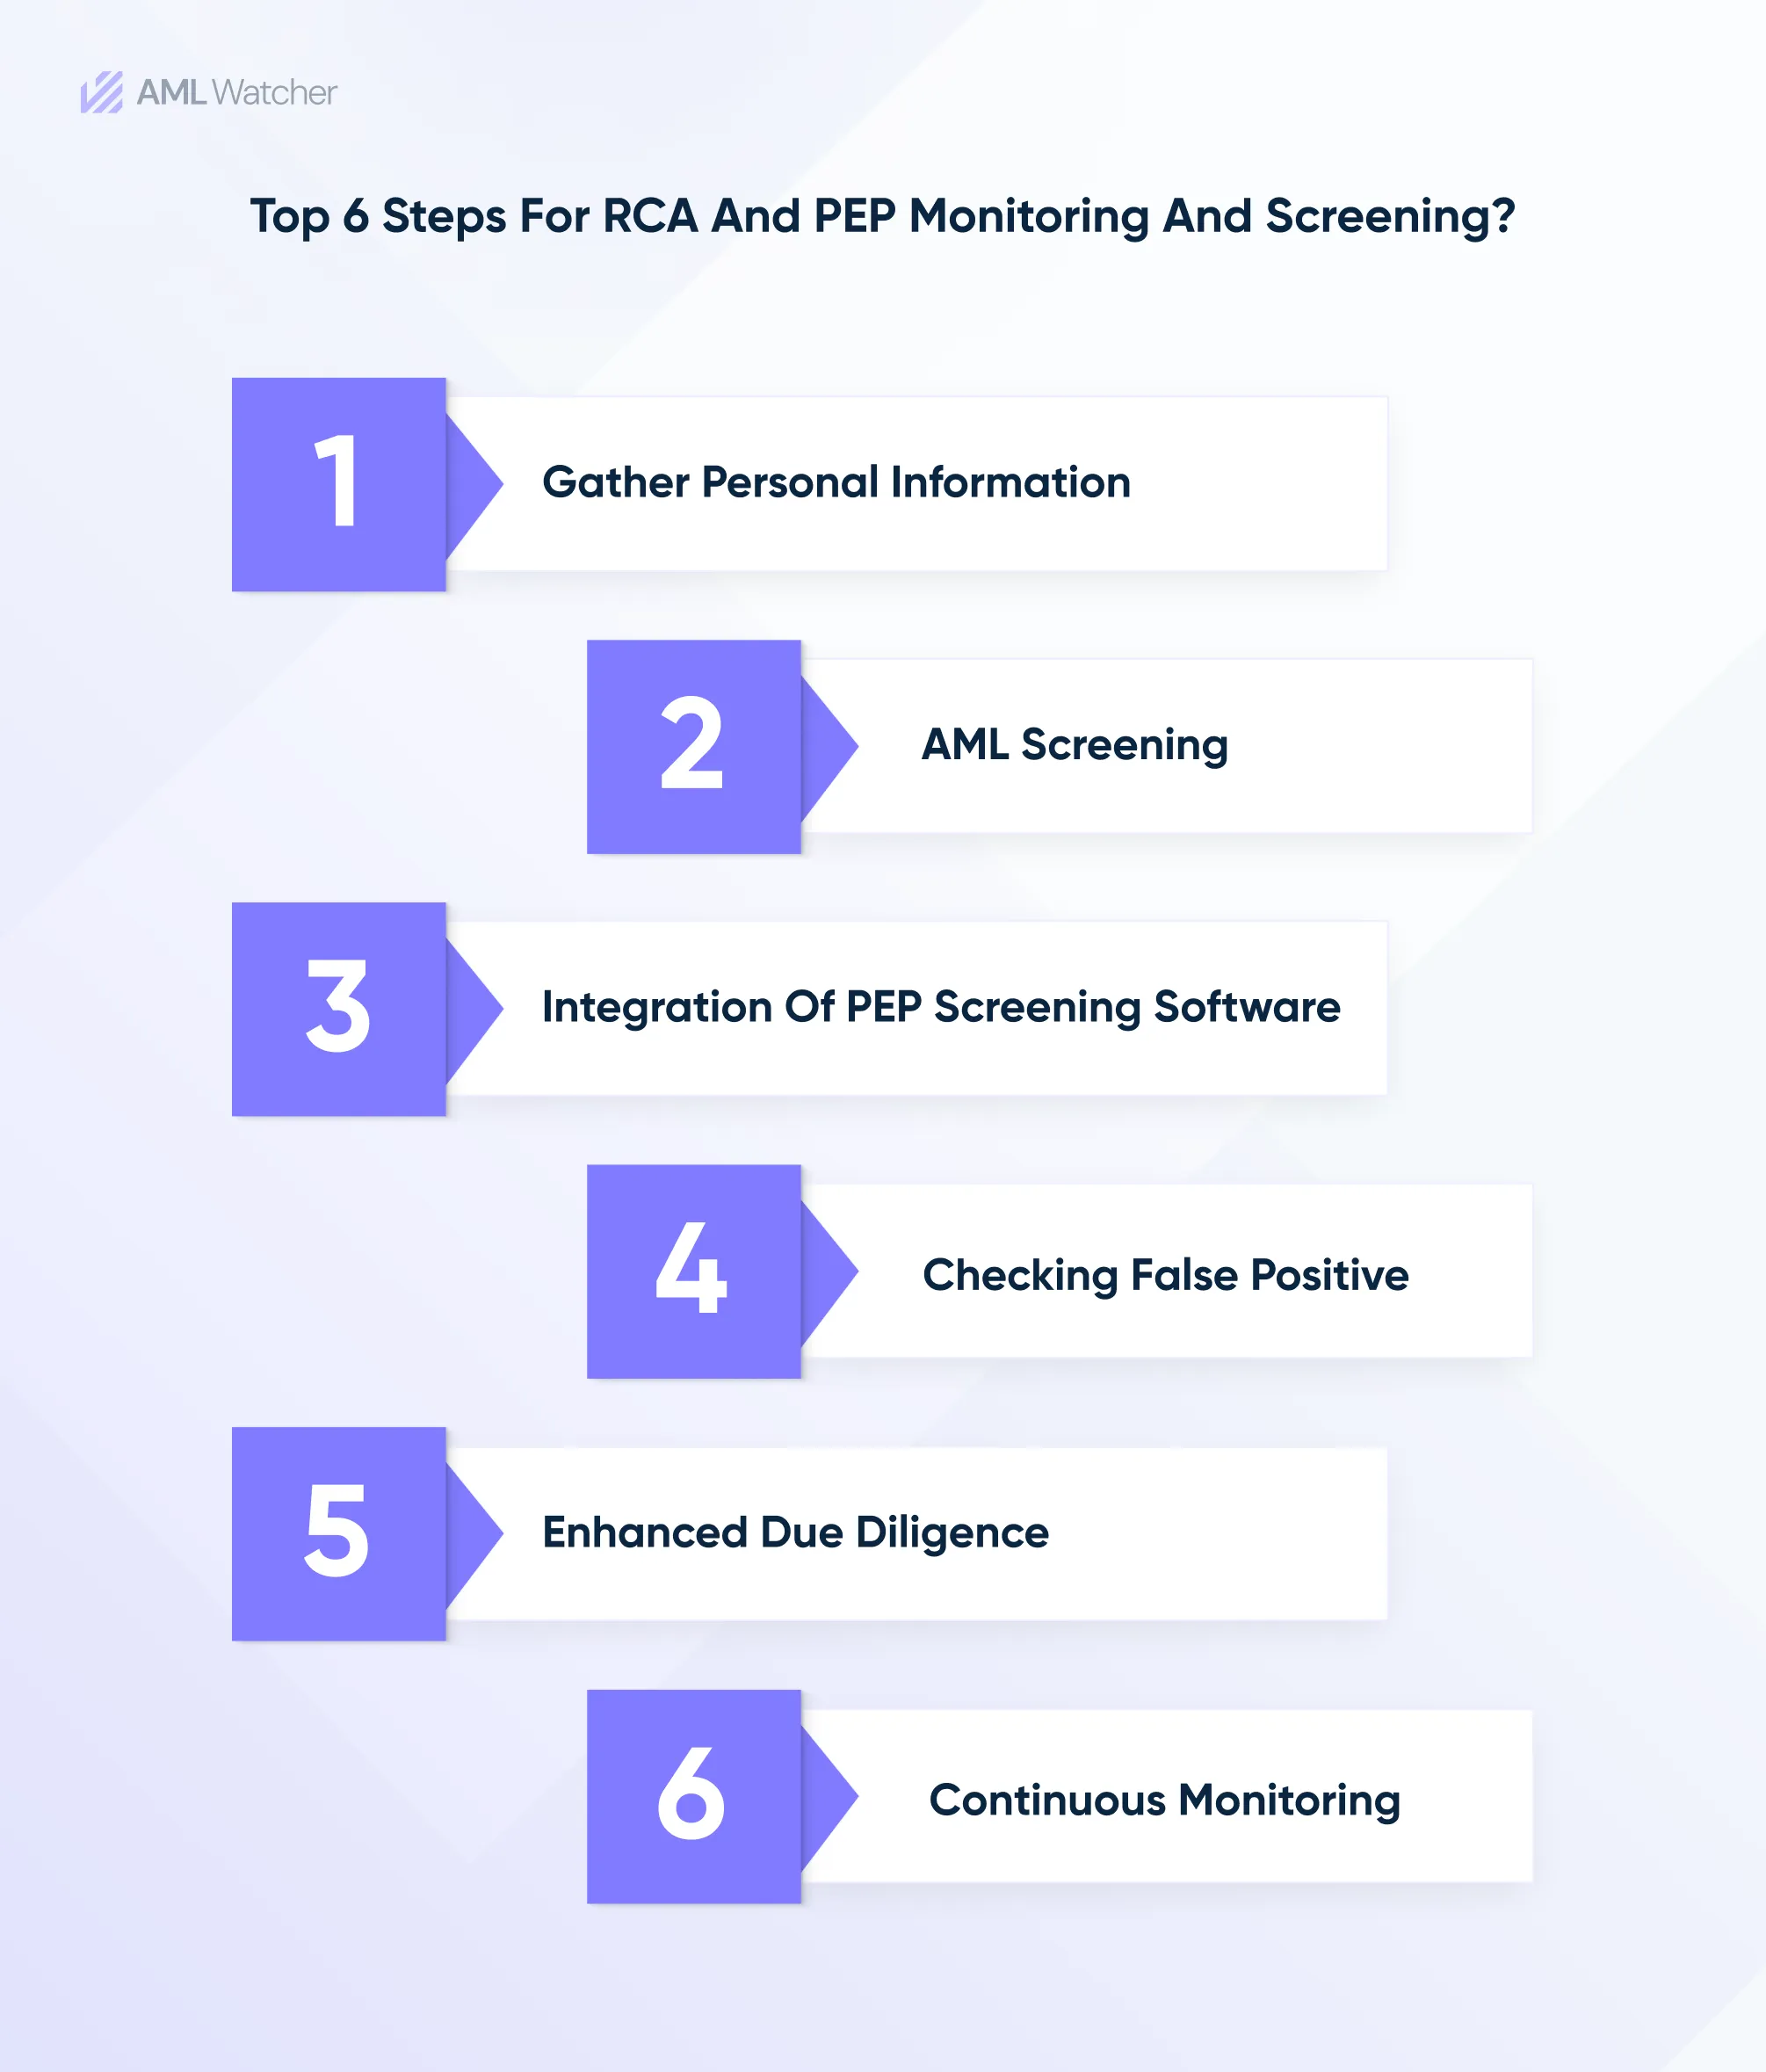 The image showcases 6 top methods to advance the screening process in 2024